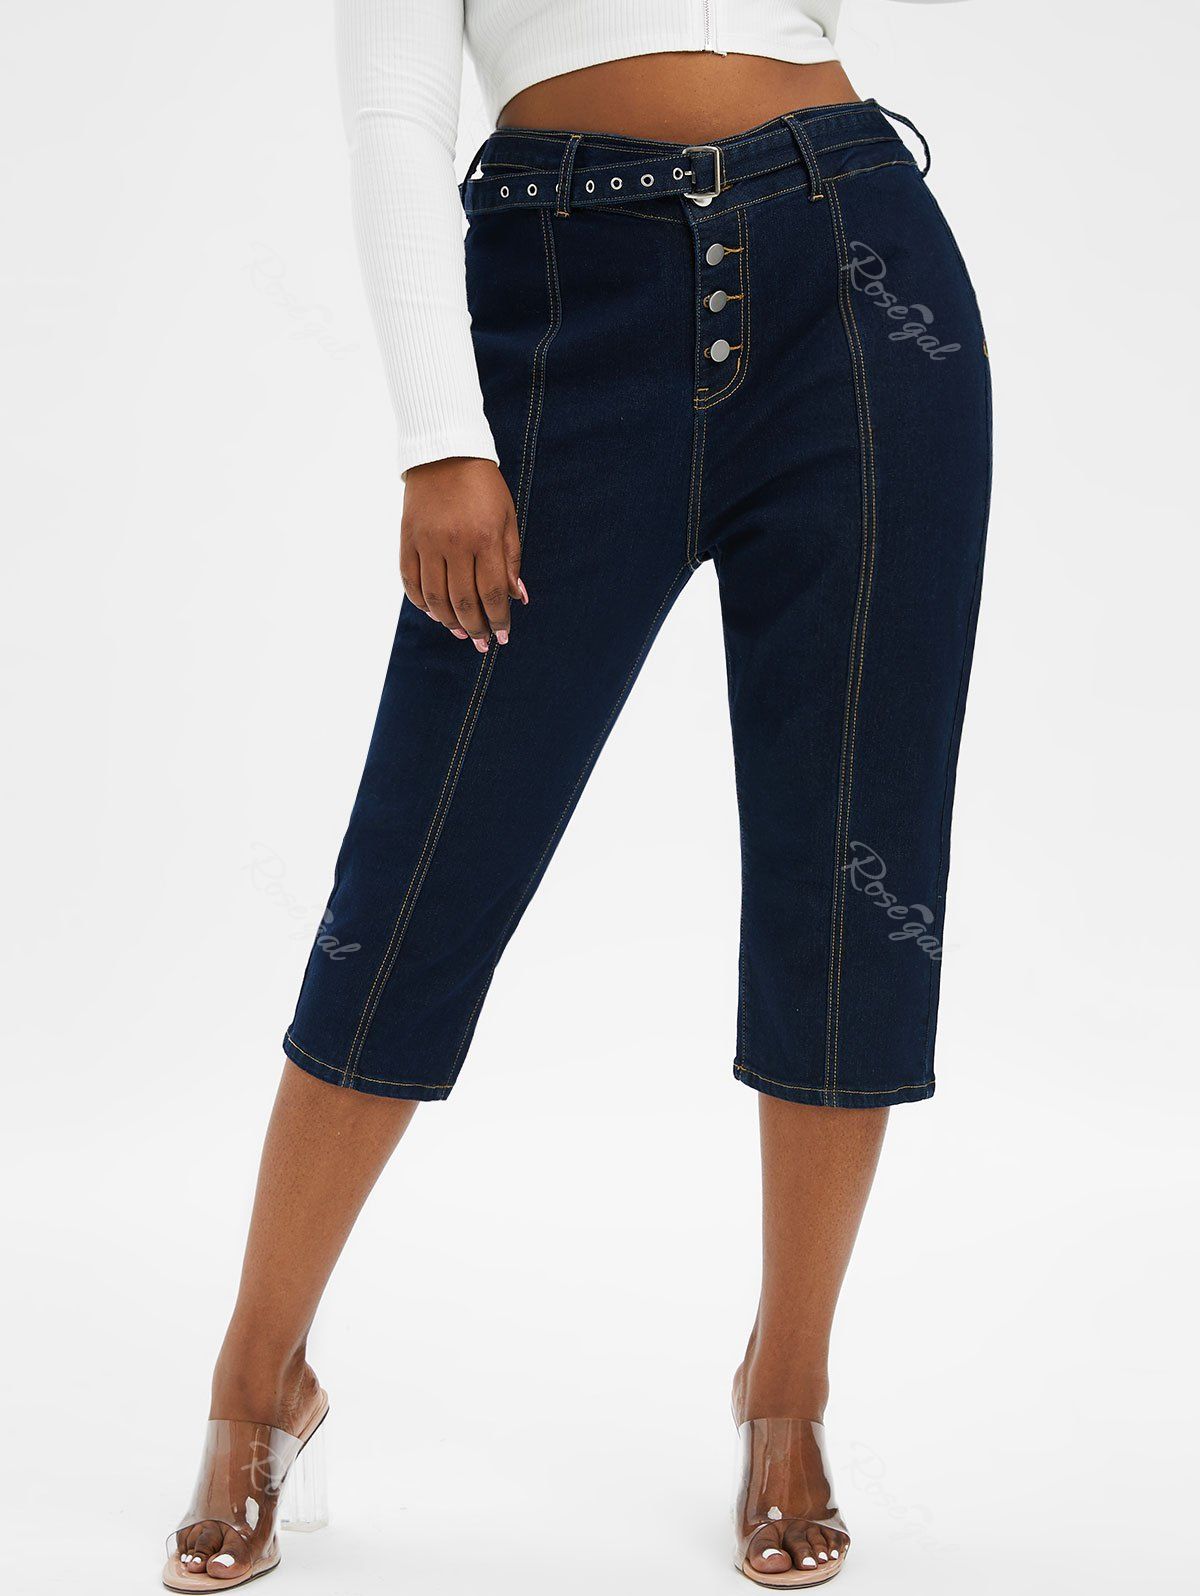 Outfit Plus Size & Curve Belted Button Fly Contrast Stitching Jeans  